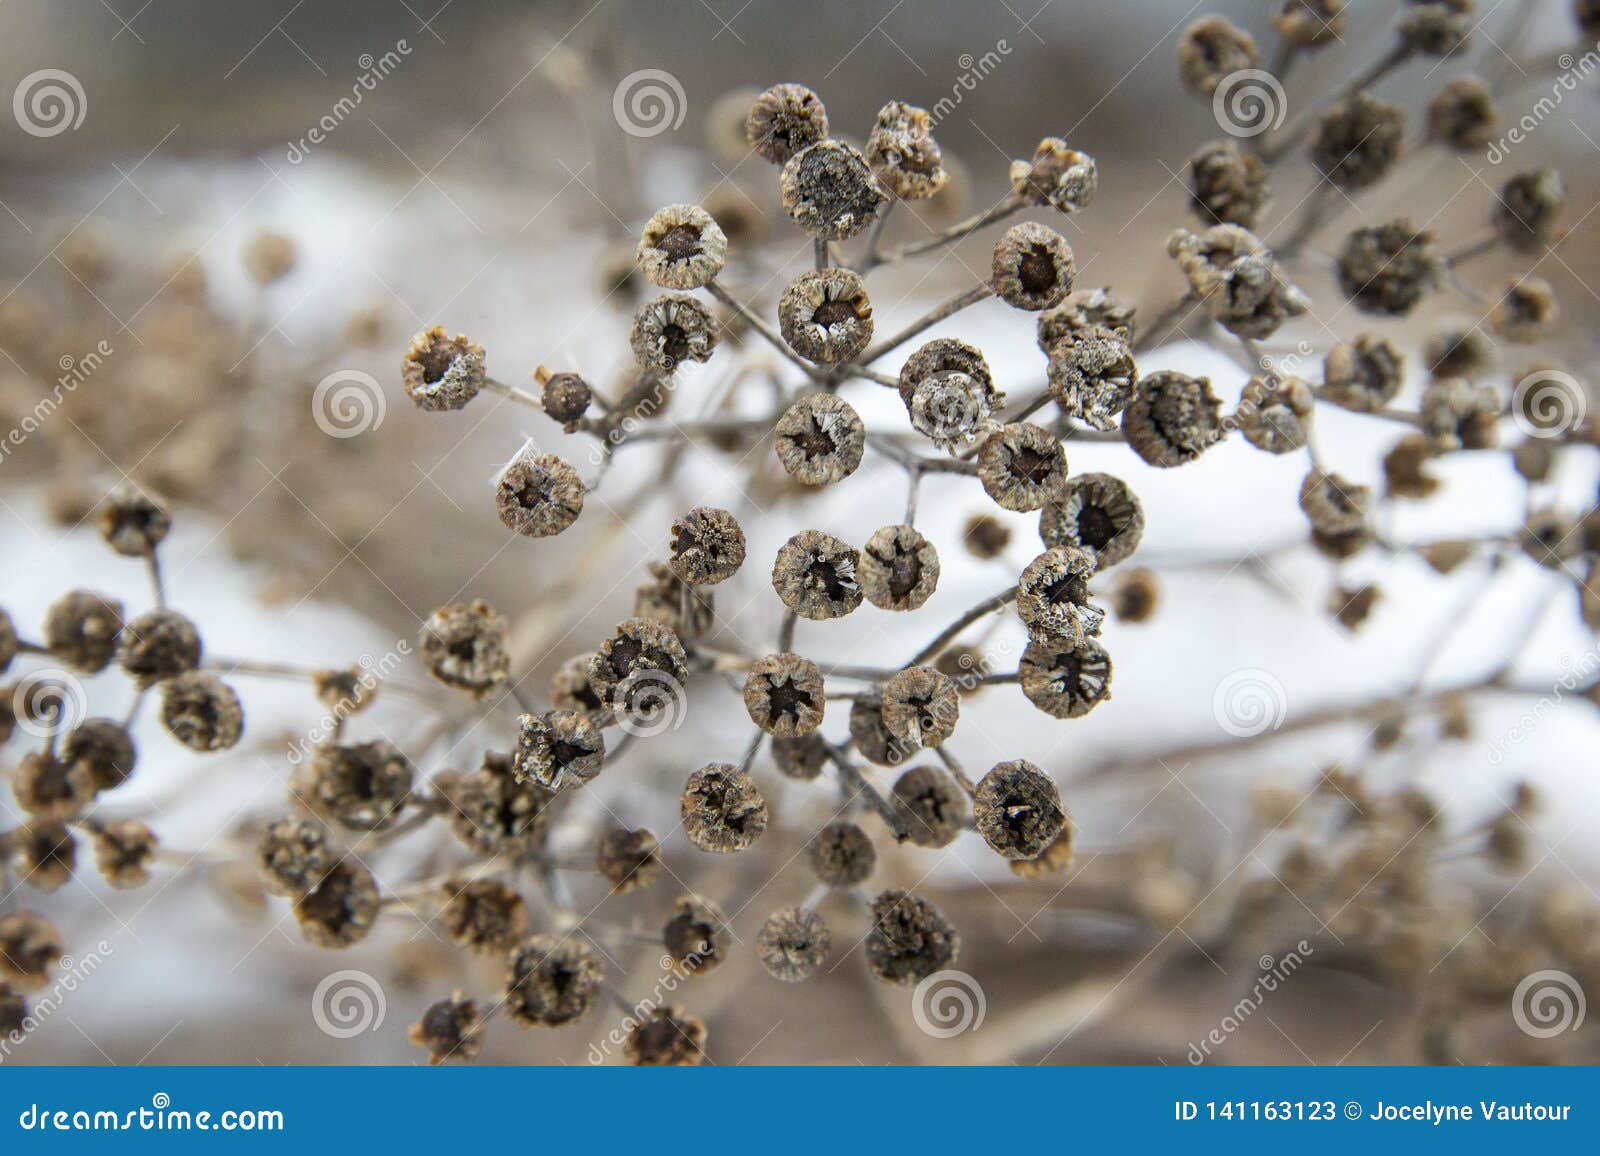 Feminine Concept Of Light Blue Background With Dried Wildflowers